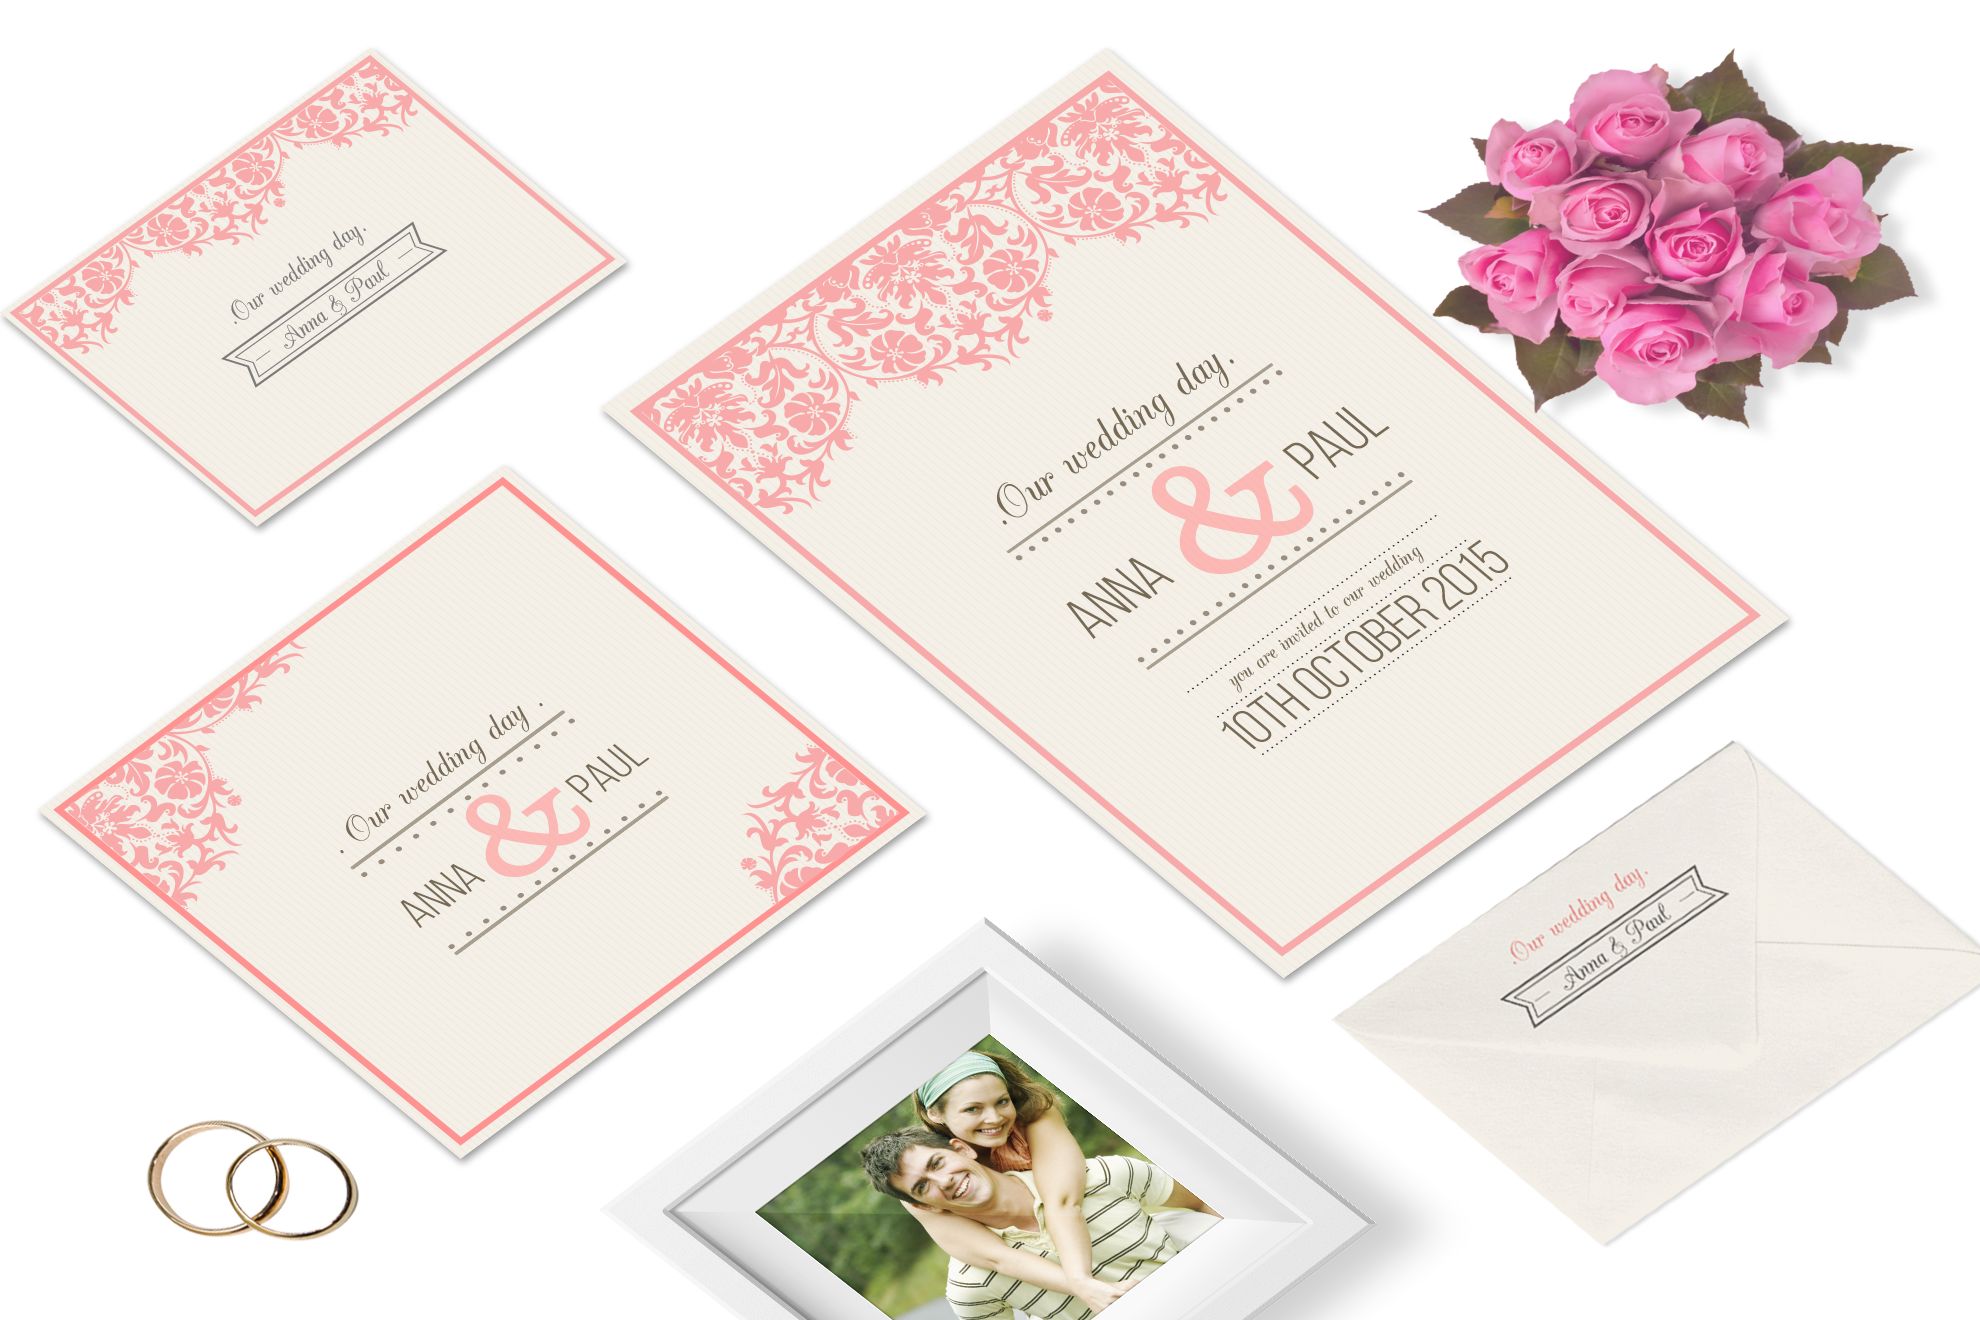 Print wedding booklets and invitations: Print booklets and wedding invitations in a few and simple clicks. Many kinds of customisation at your disposal with a click!